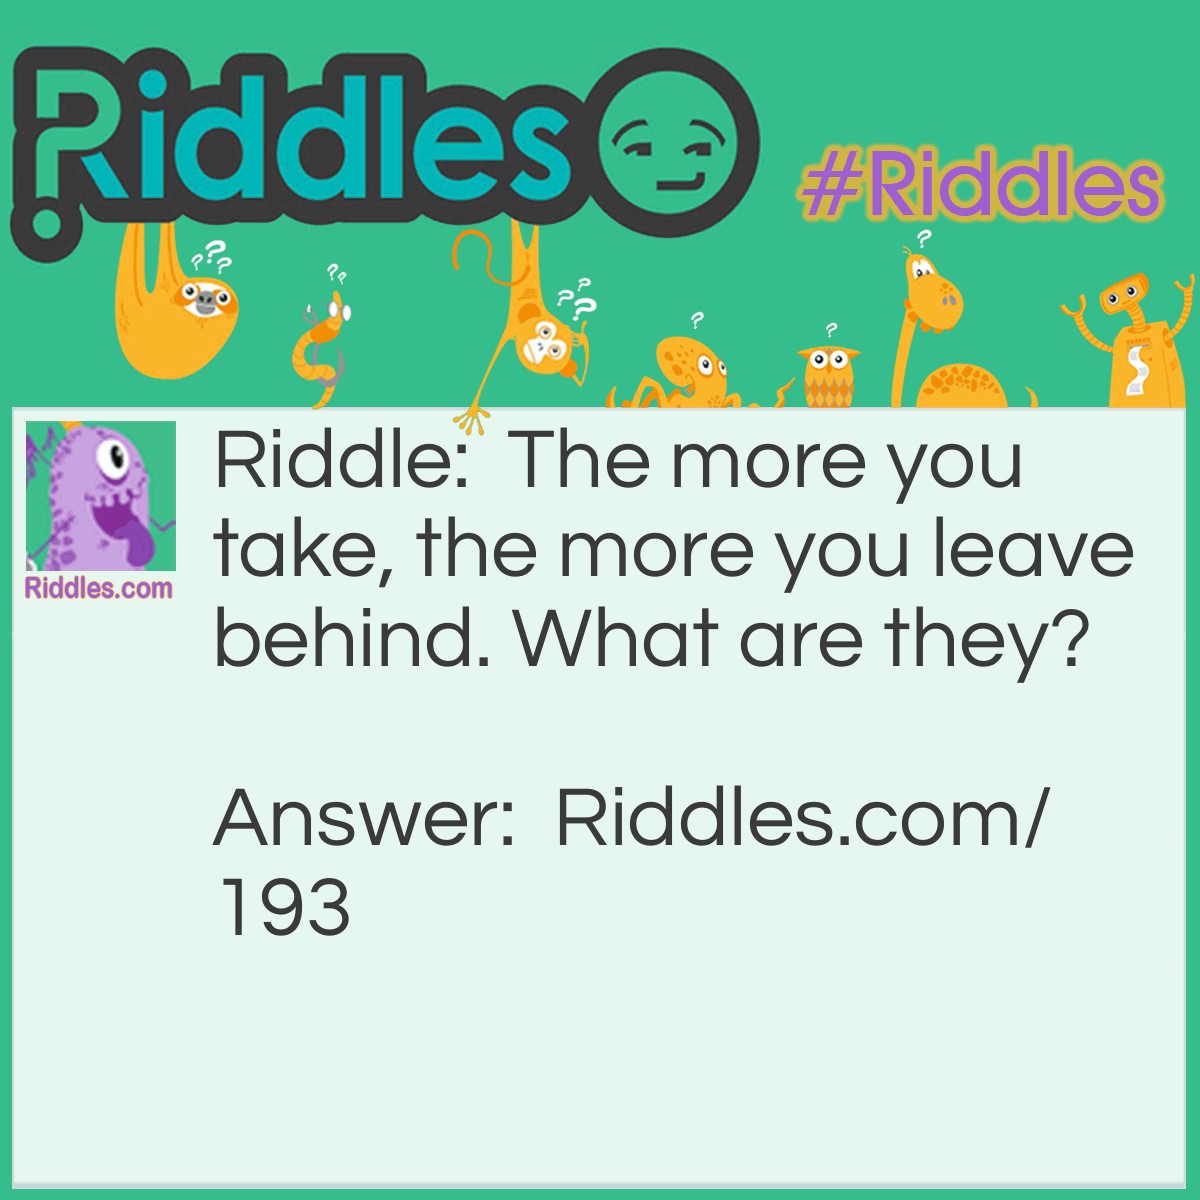 Riddle: The more you take, the more you leave behind. What are they? Answer: Footprints.